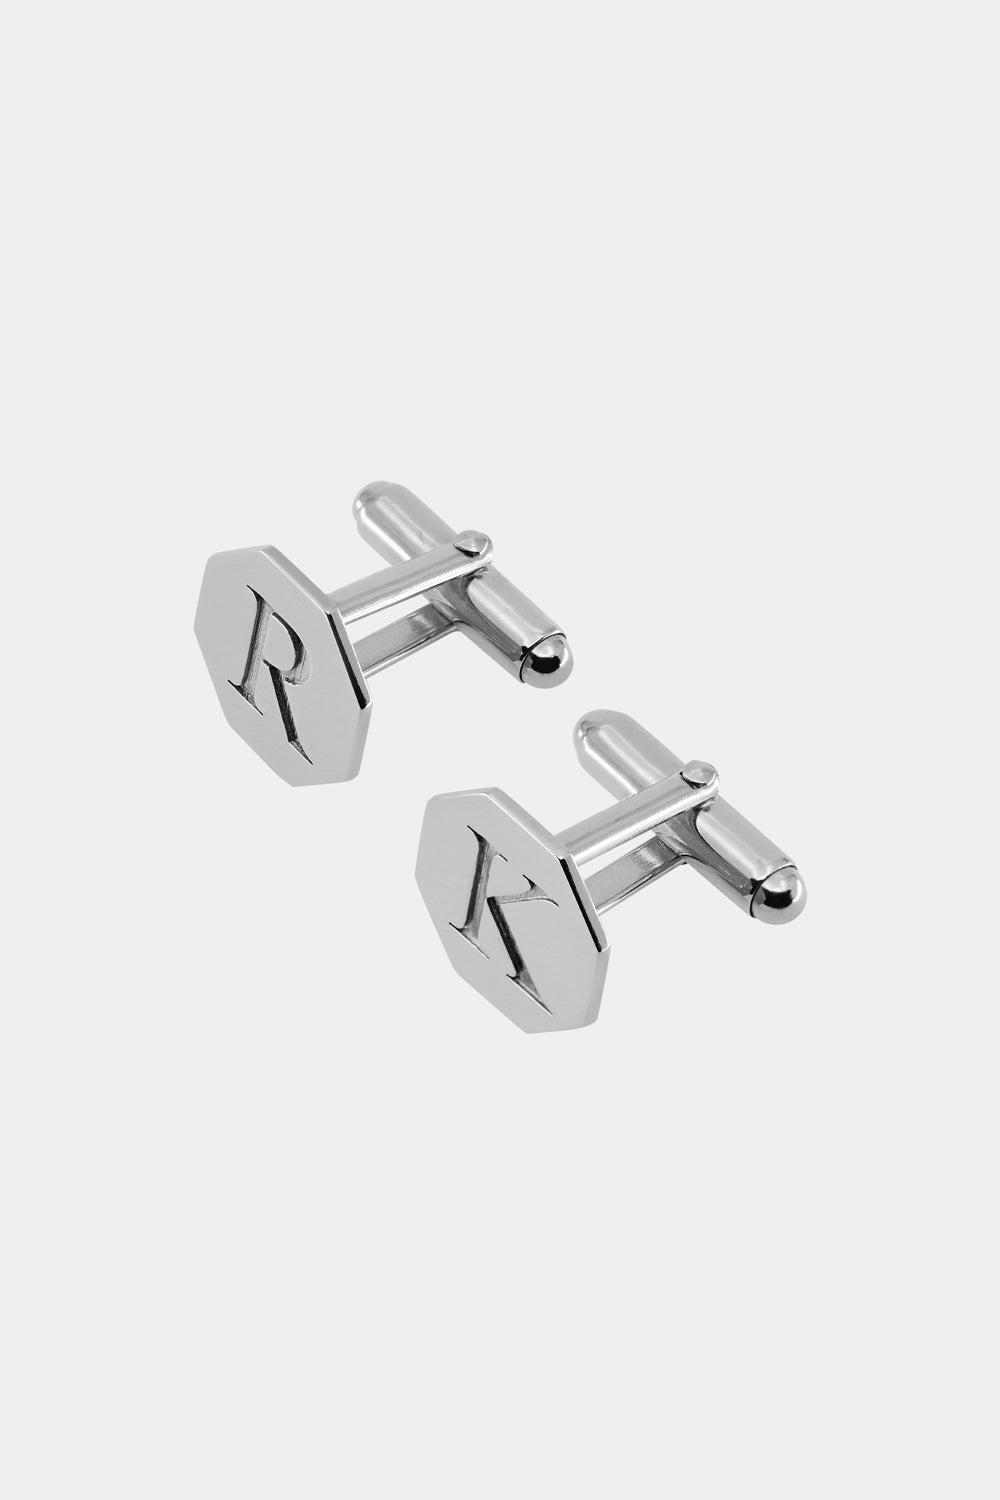 Letter Cufflinks | Silver or White Gold, More options available| Natasha Schweitzer